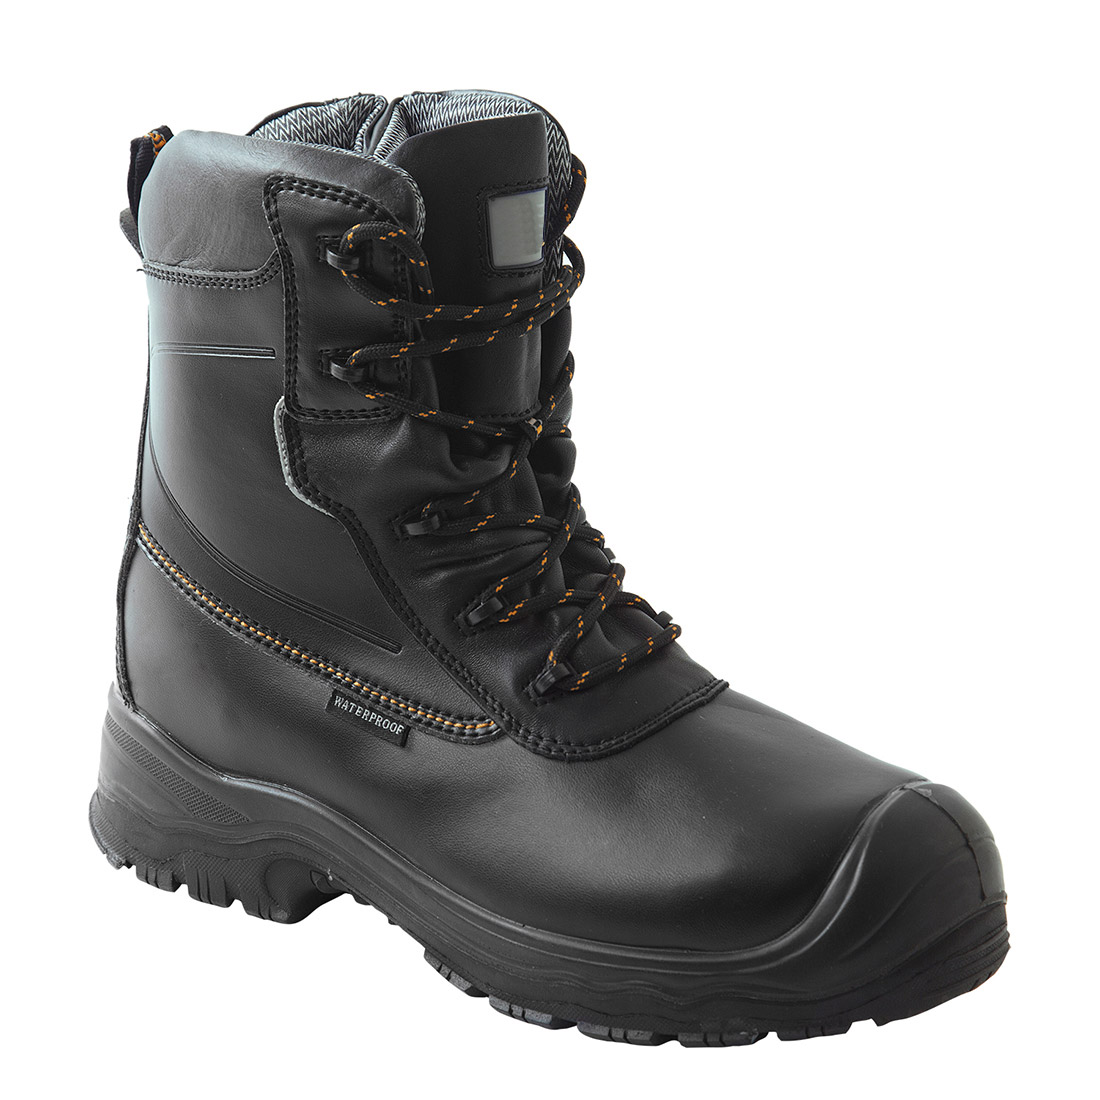 Compositelite Traction 7 inch (18cm) Safety Boot S3 HRO CI WR